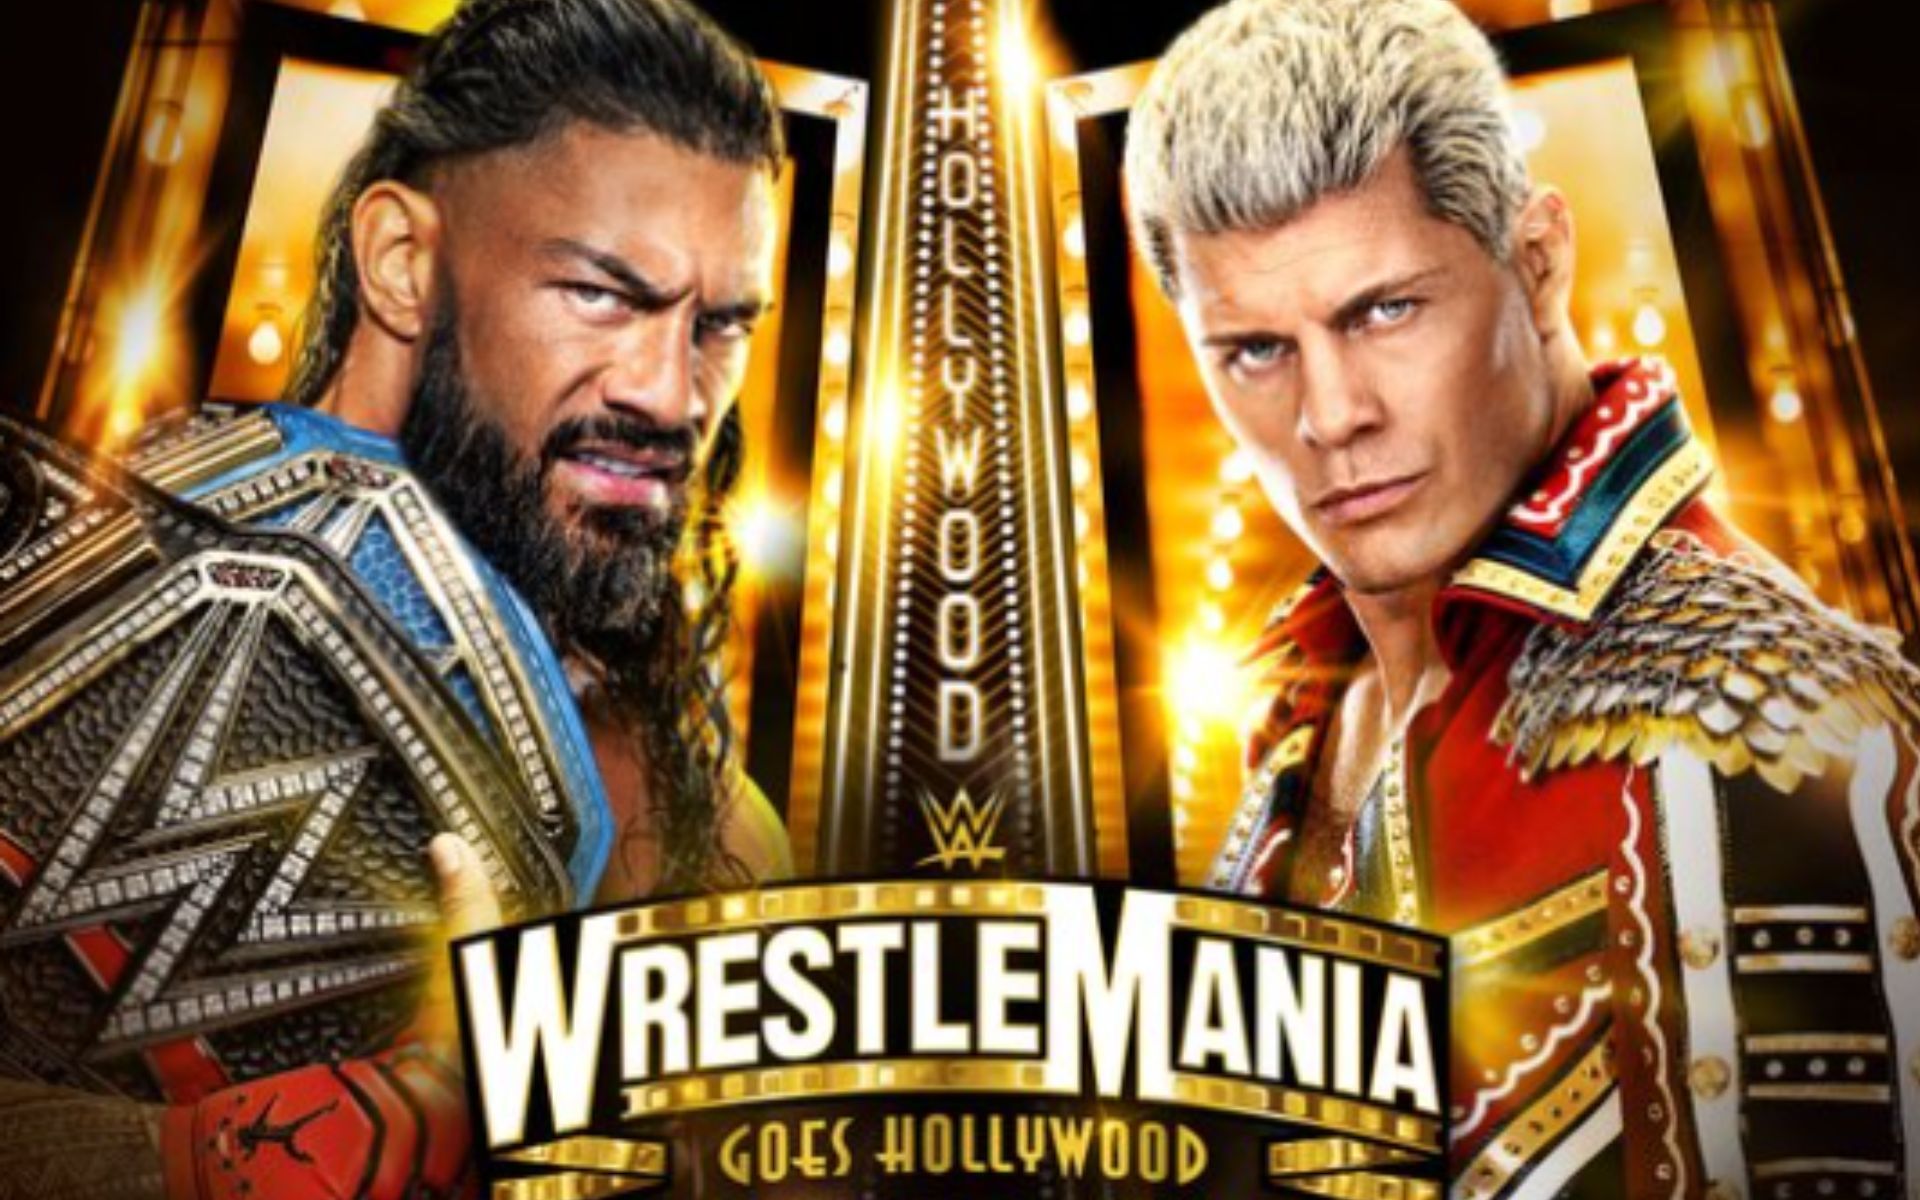 Roman Reigns and Cody Rhodes are set to clash in the main event of Night 2 at WrestleMania 39